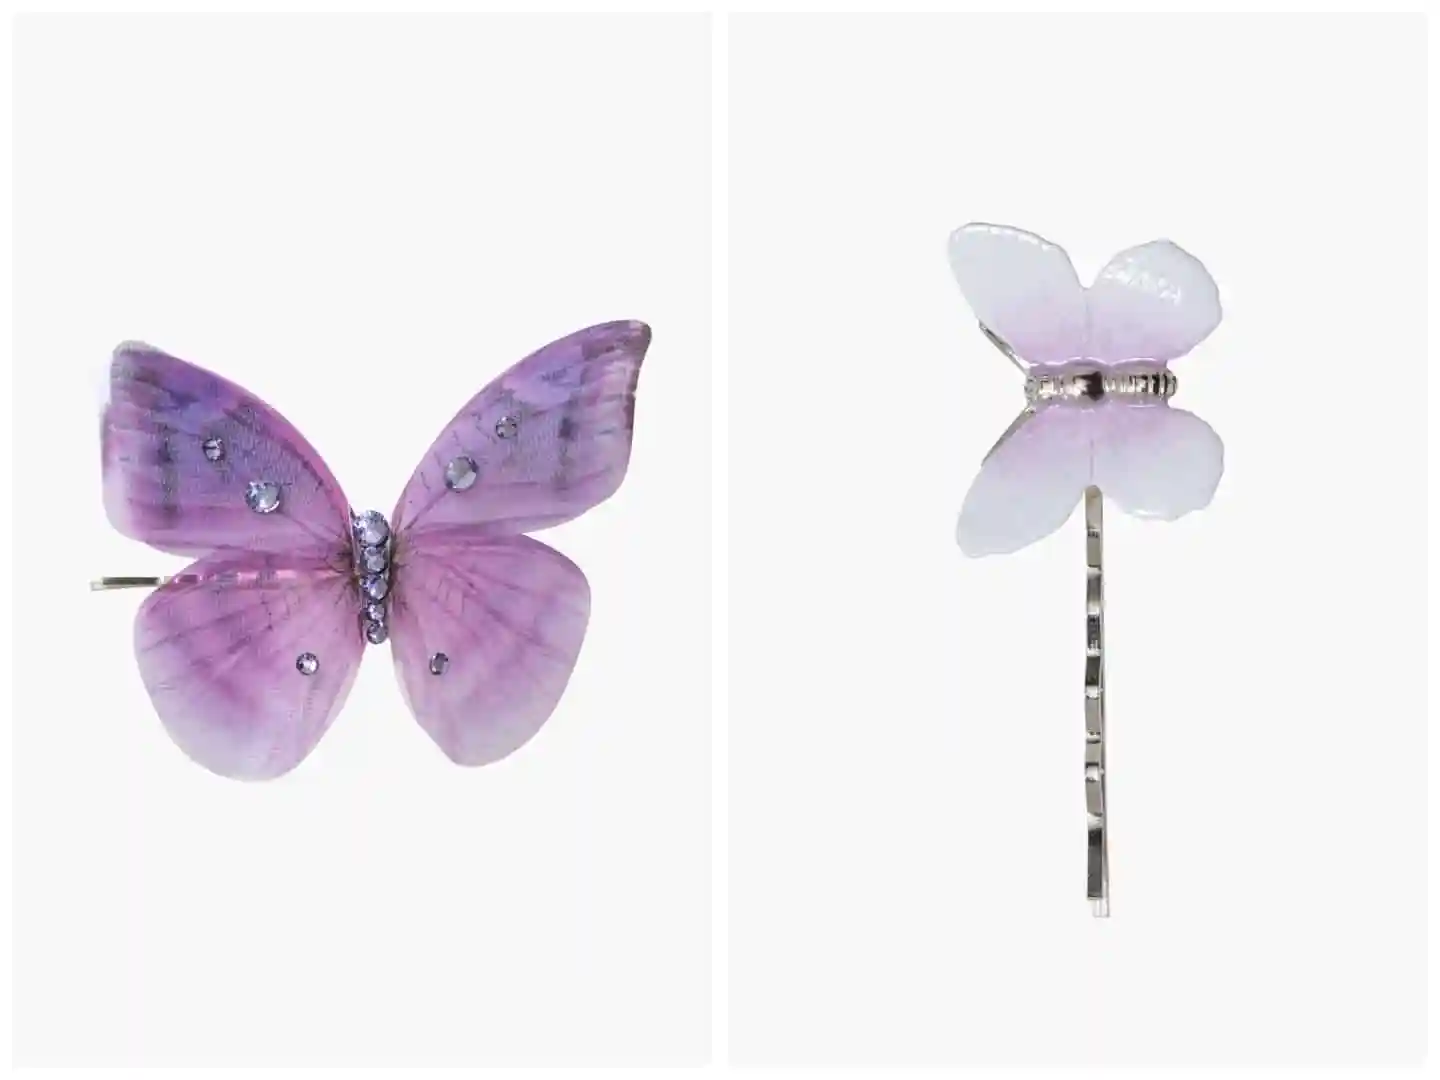 The Gala and Gabby bobby pins are a collaboration from Jennifer Behr and Betsey Johnson.